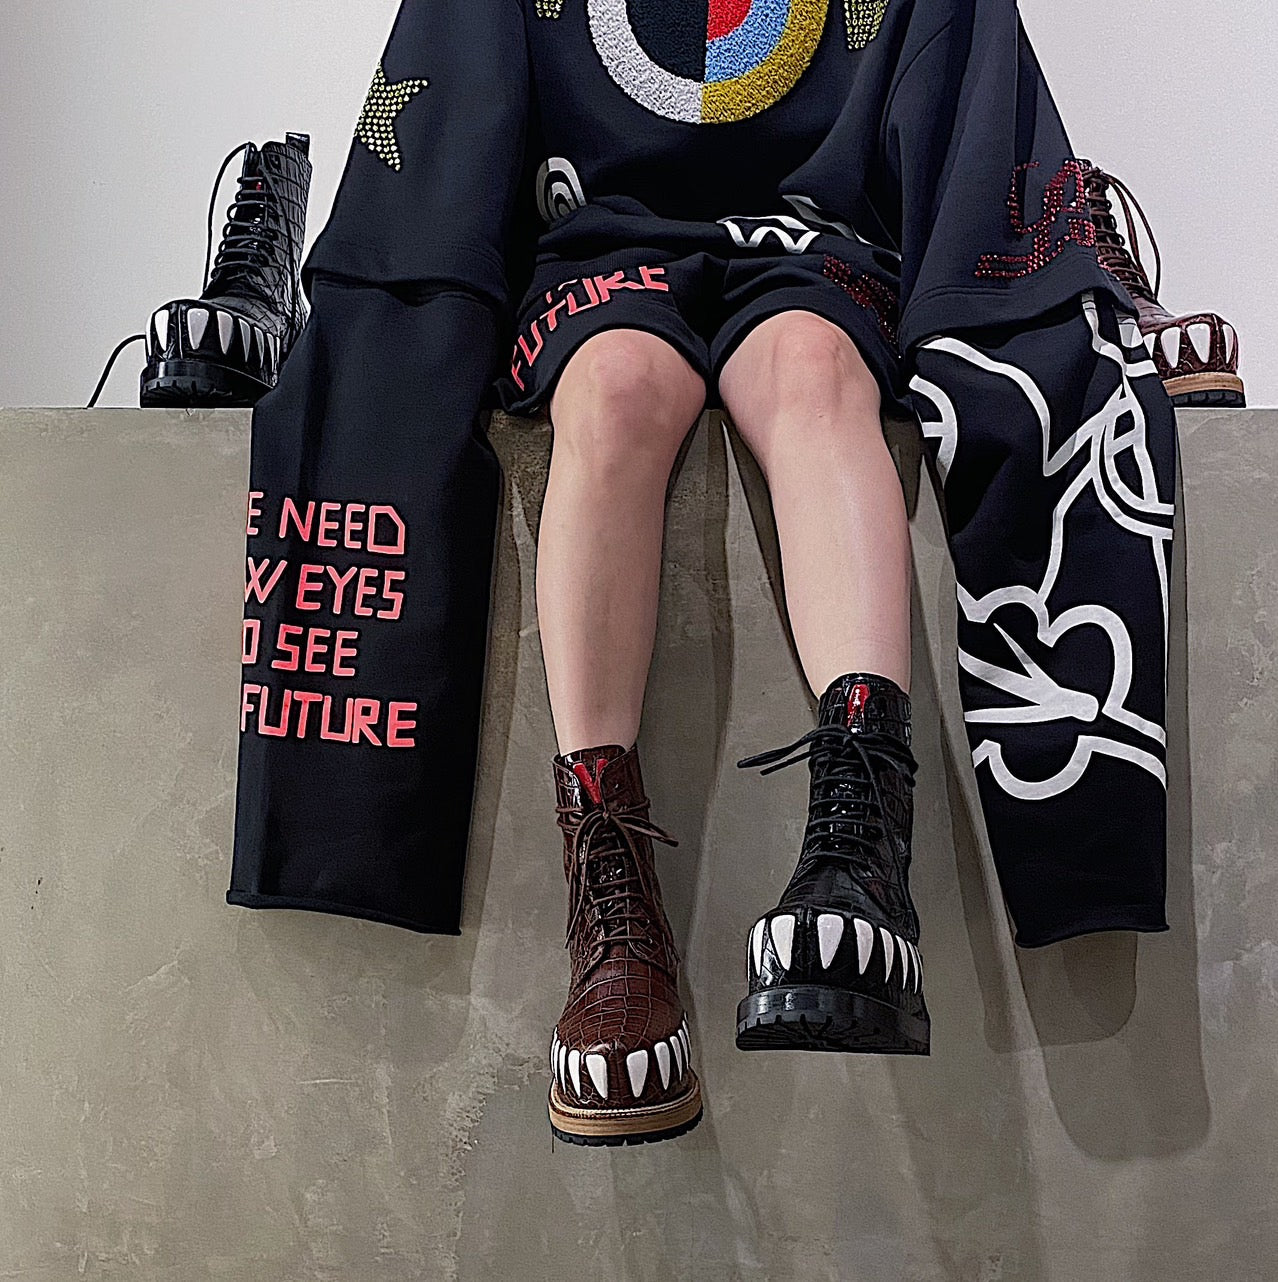 【Walter Van Beirendonck】<br> 23AW collection "WE NEED NEW EYES TO SEE THE FUTURE" is now available!